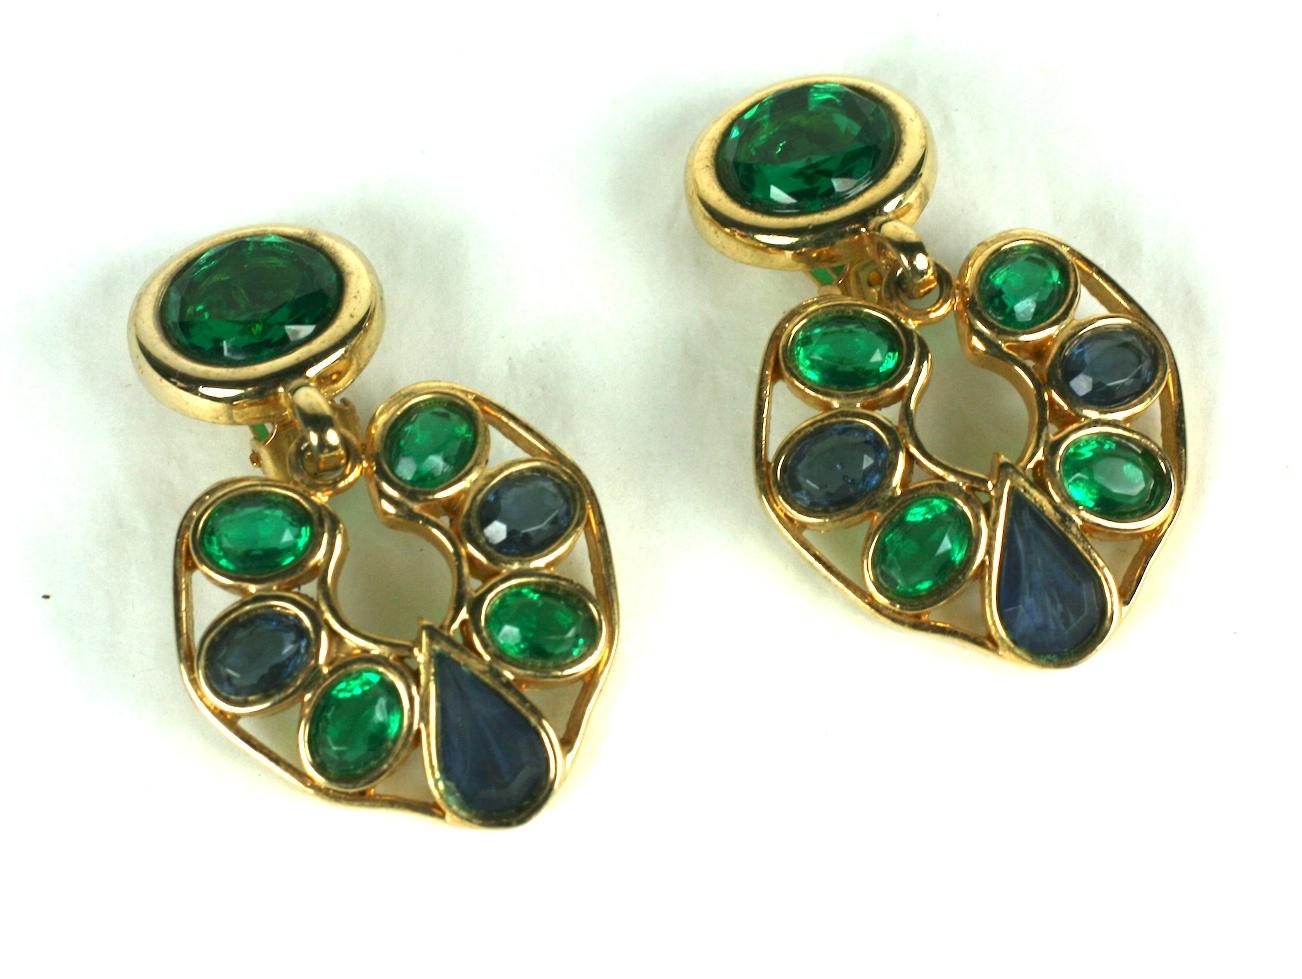 Striking Faux Emerald and Sapphire Dangle Ear Clips from the 1980's. High quality construction with open back stones and clip back fittings. Gilt metal. 
2.25